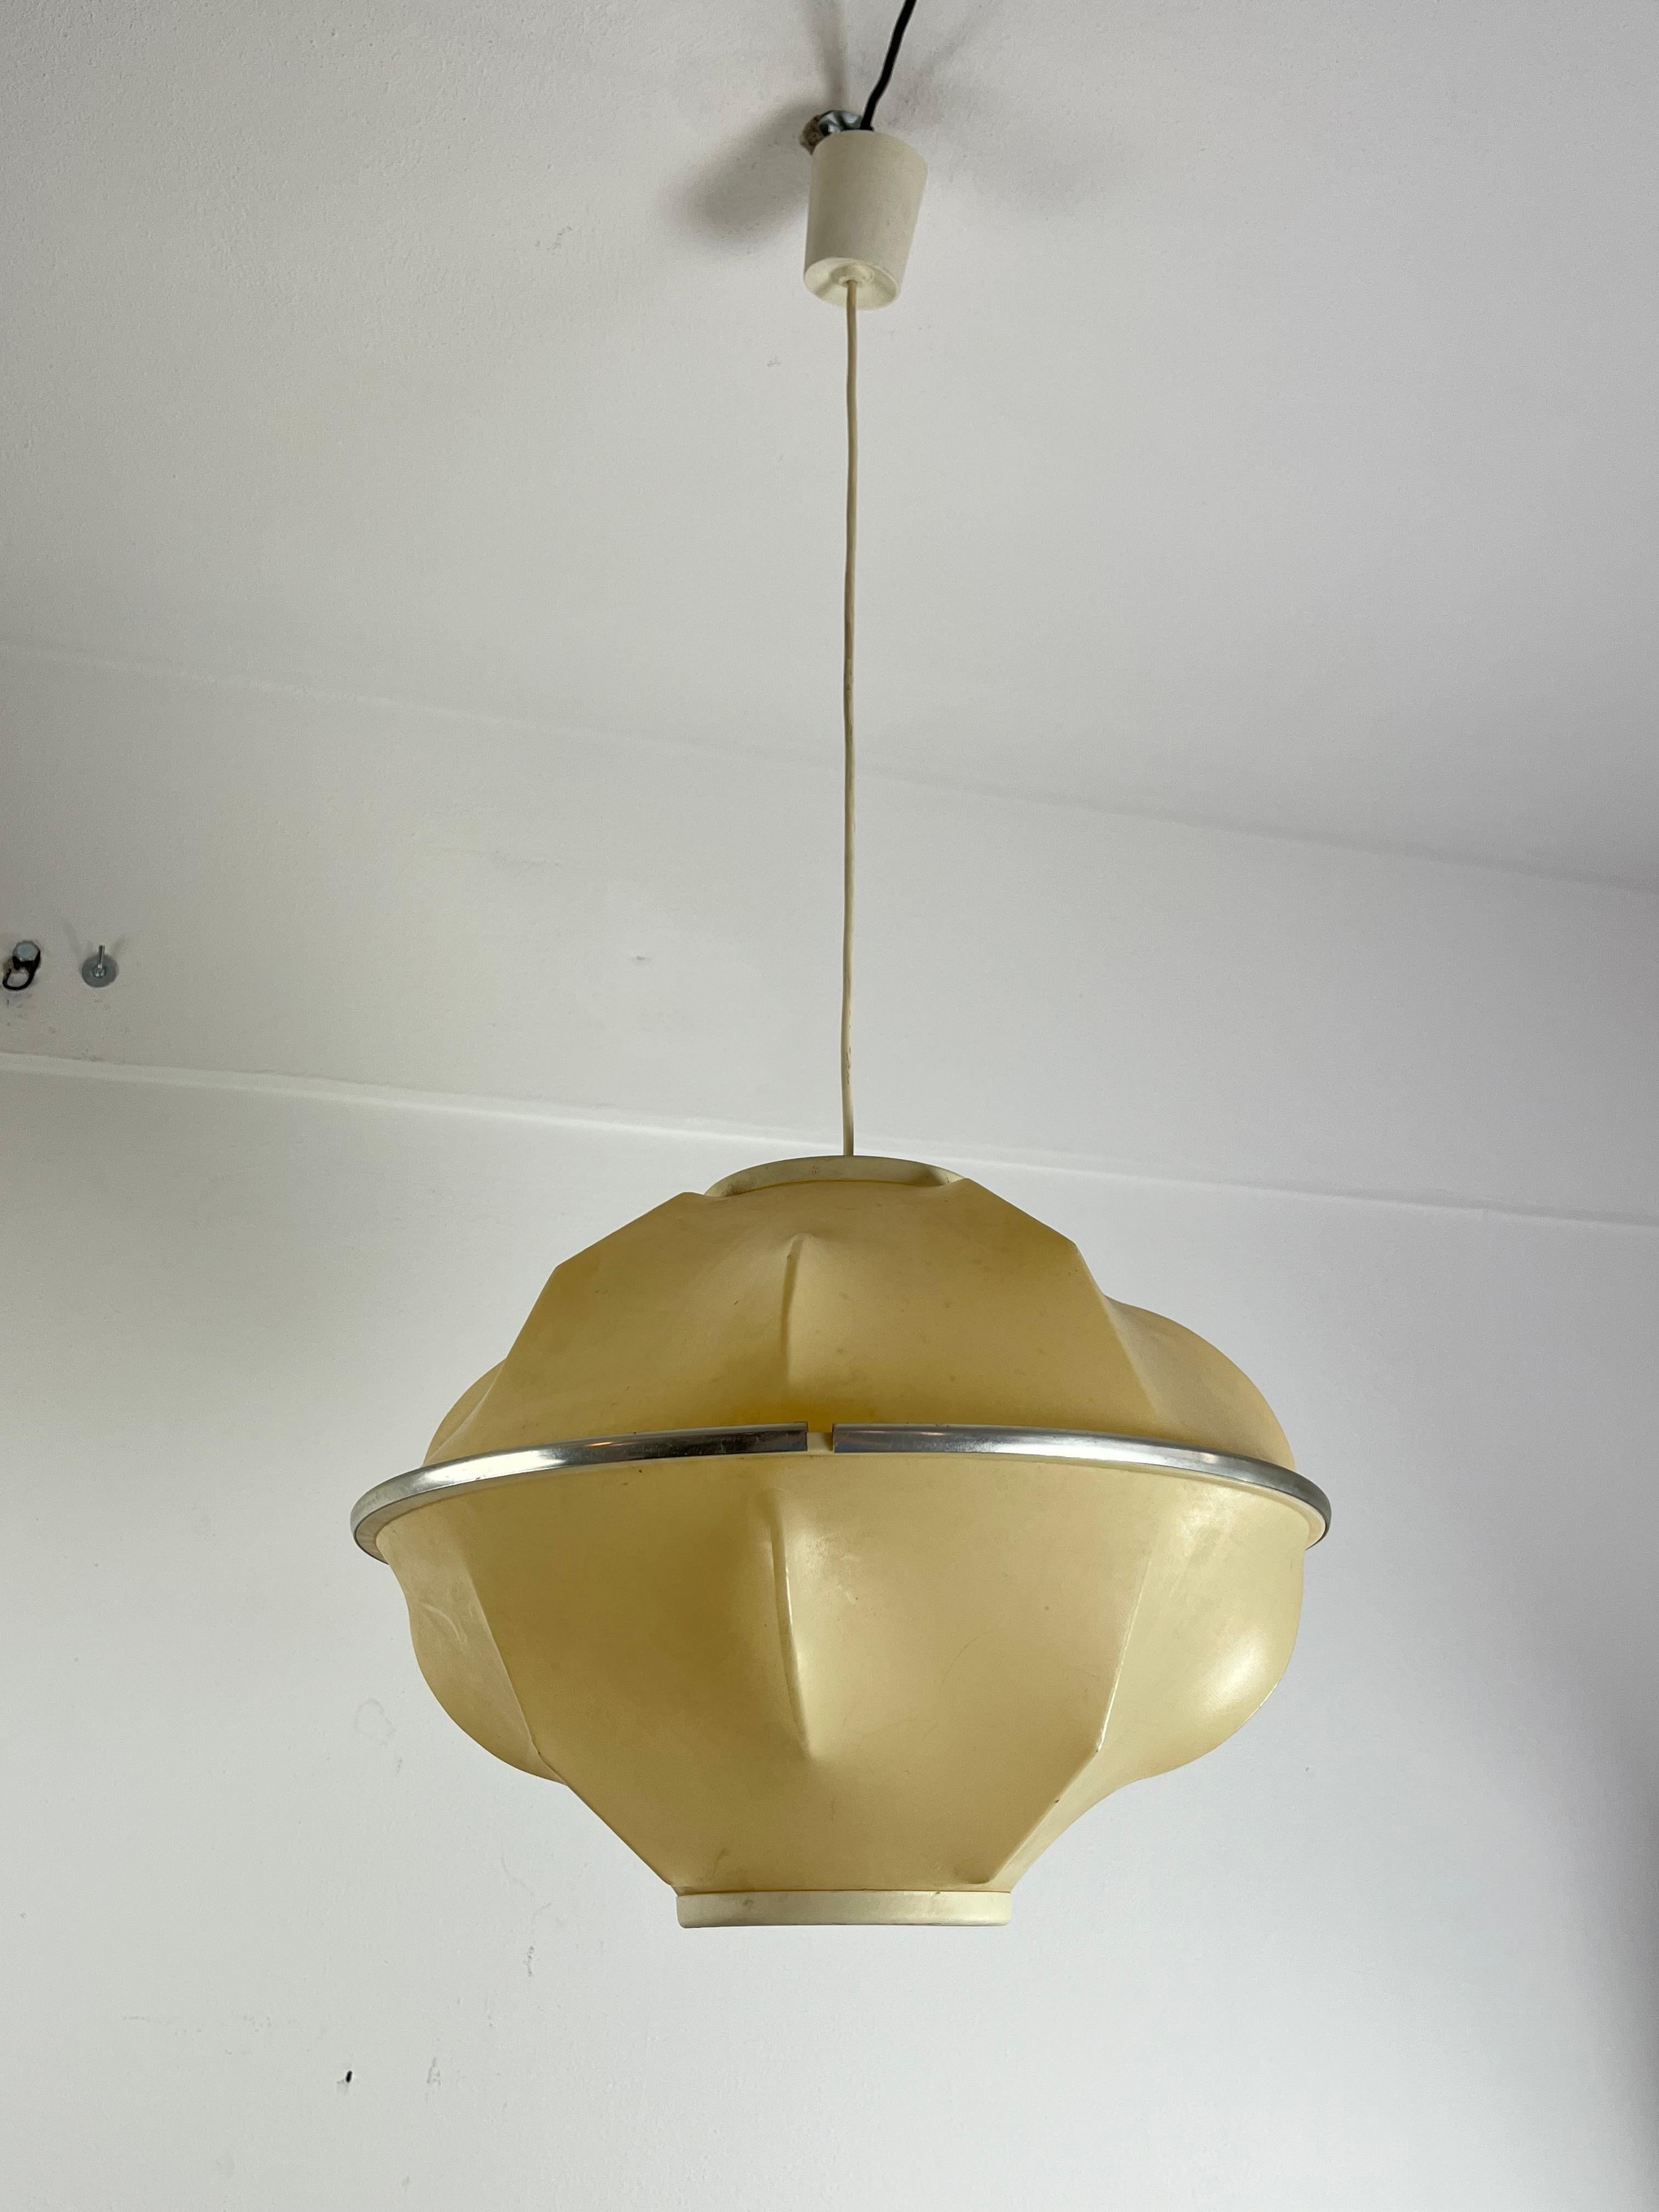 Mid-Century Modern Pendant Lamp Designed & Manufactered Probably By Flos 1960s For Sale 2